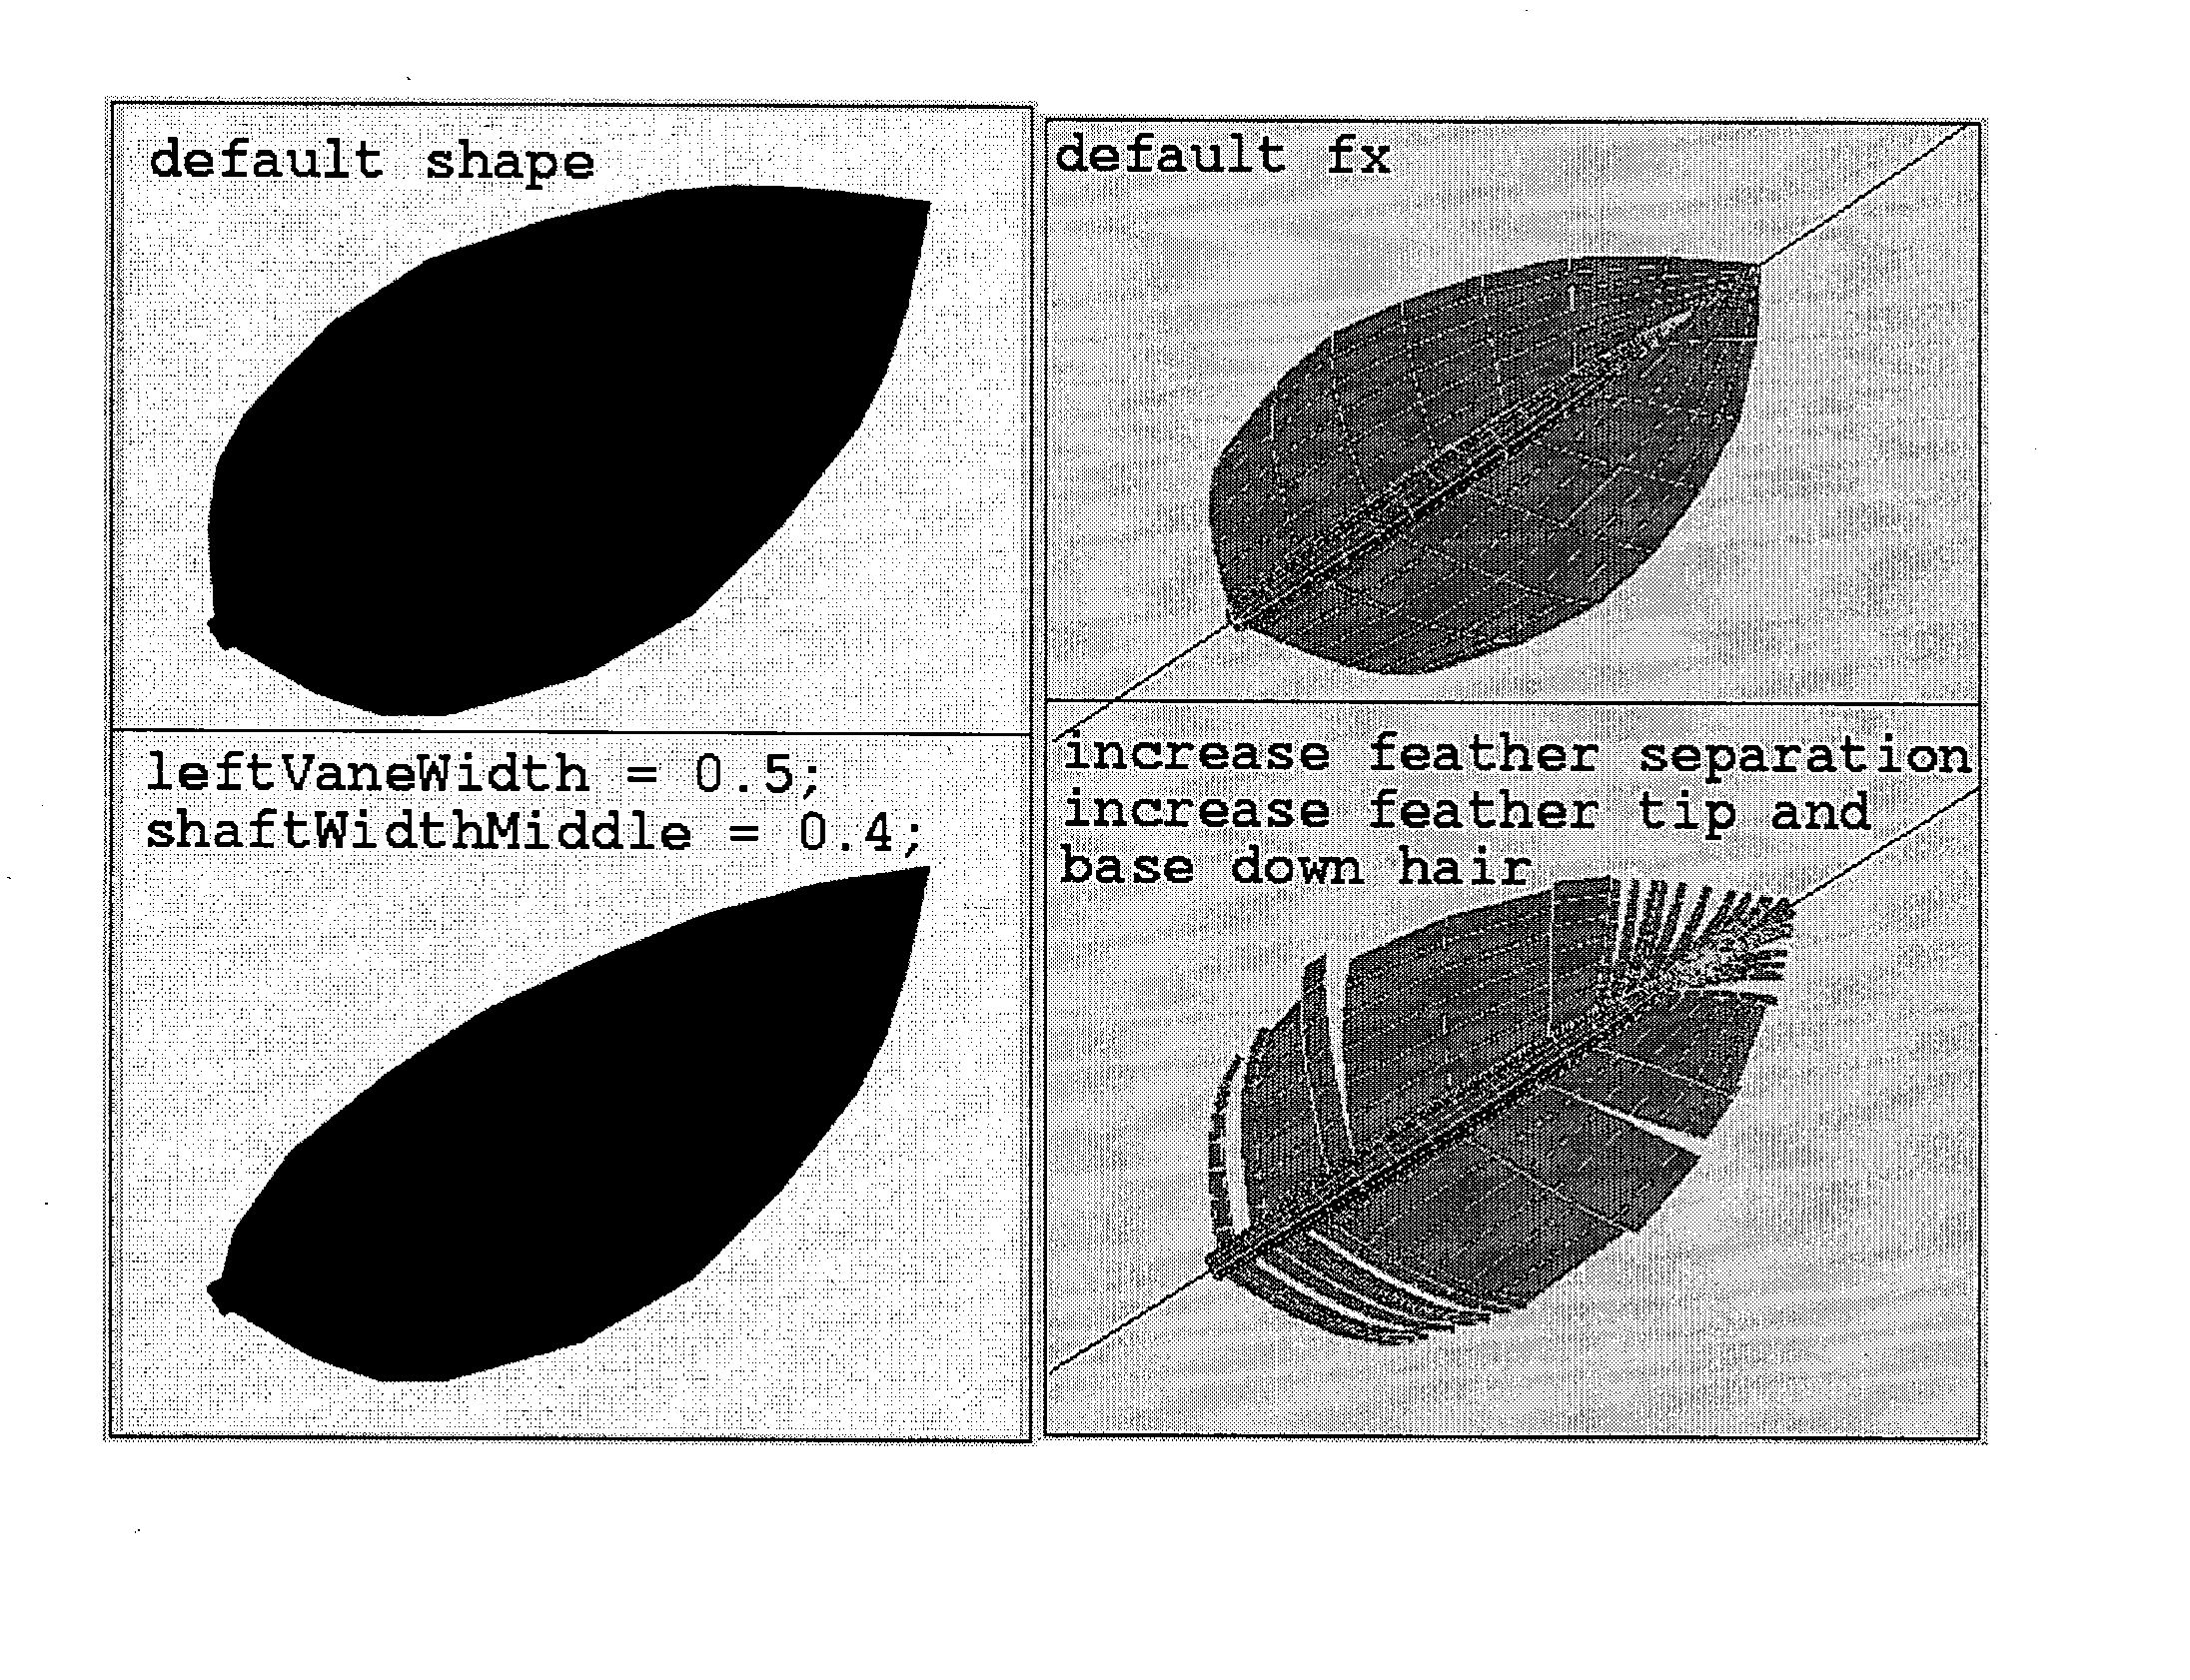 System and process for digital generation, placement, animation and display of feathers and other surface-attached geometry for computer generated imagery